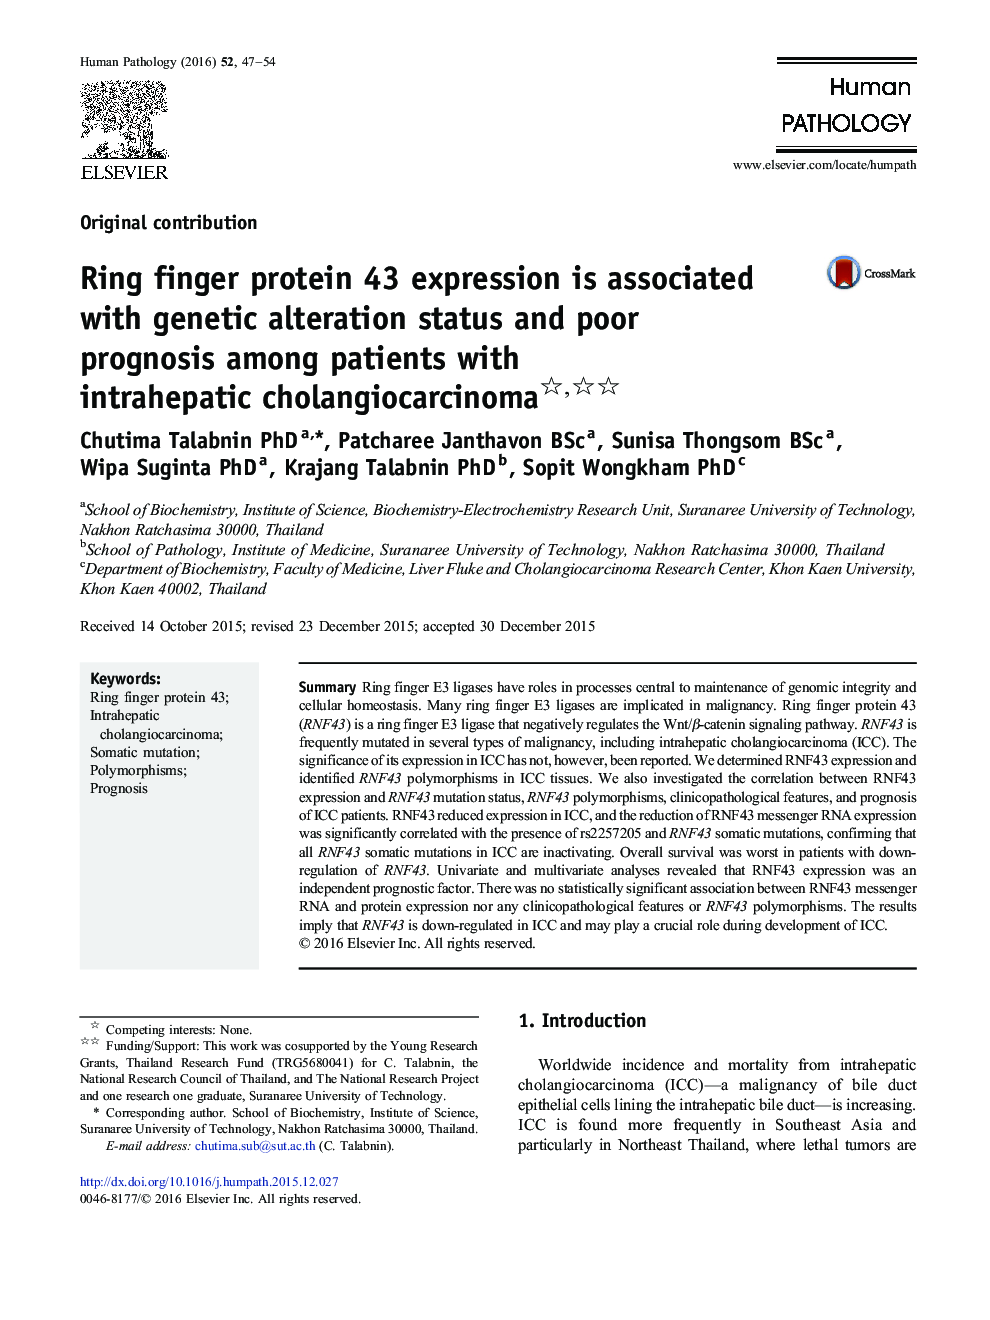 Ring finger protein 43 expression is associated with genetic alteration status and poor prognosis among patients with intrahepatic cholangiocarcinoma